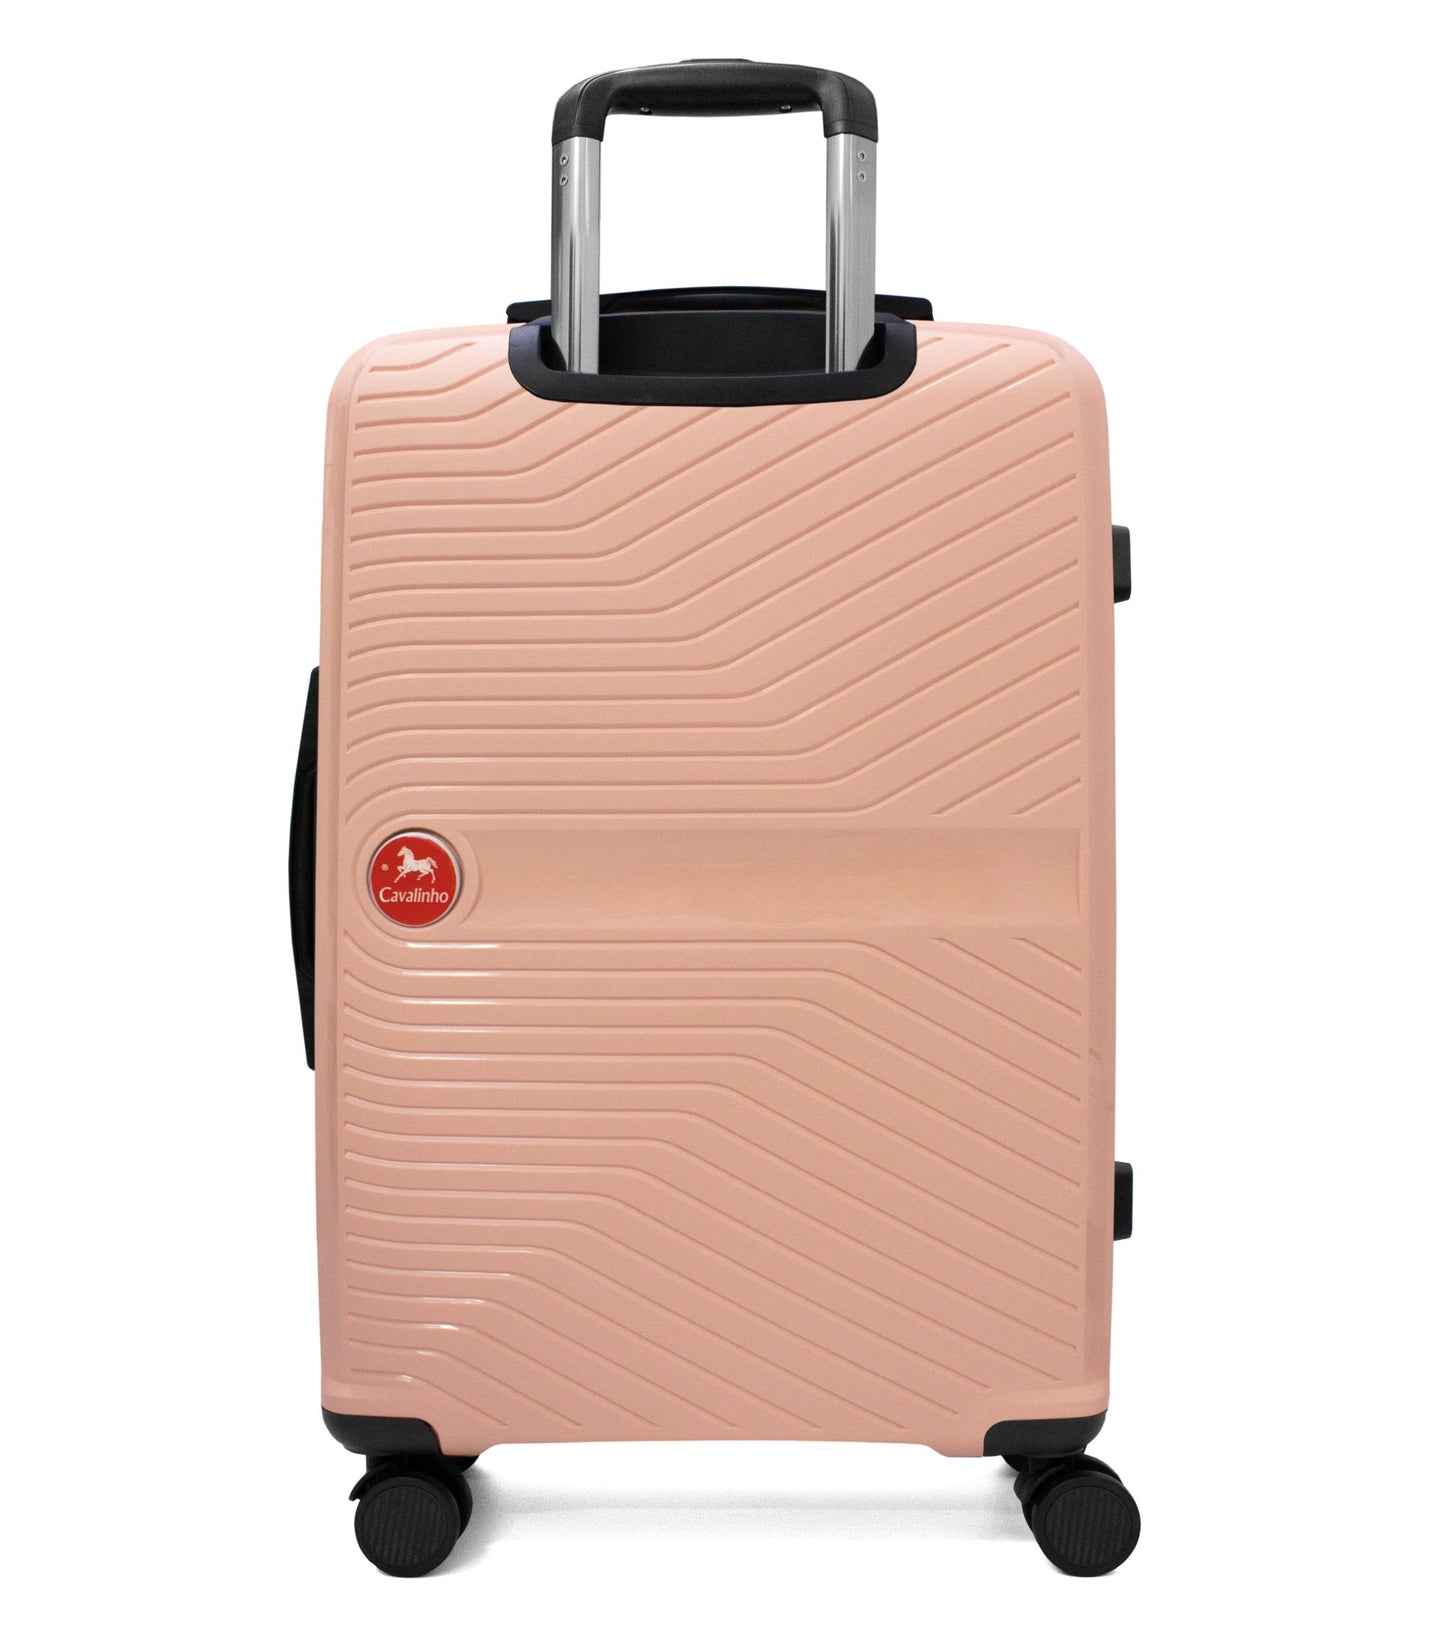 #color_ 24 inch Salmon | Cavalinho Colorful Check-in Hardside Luggage (24") - 24 inch Salmon - 68020004.11.24_3